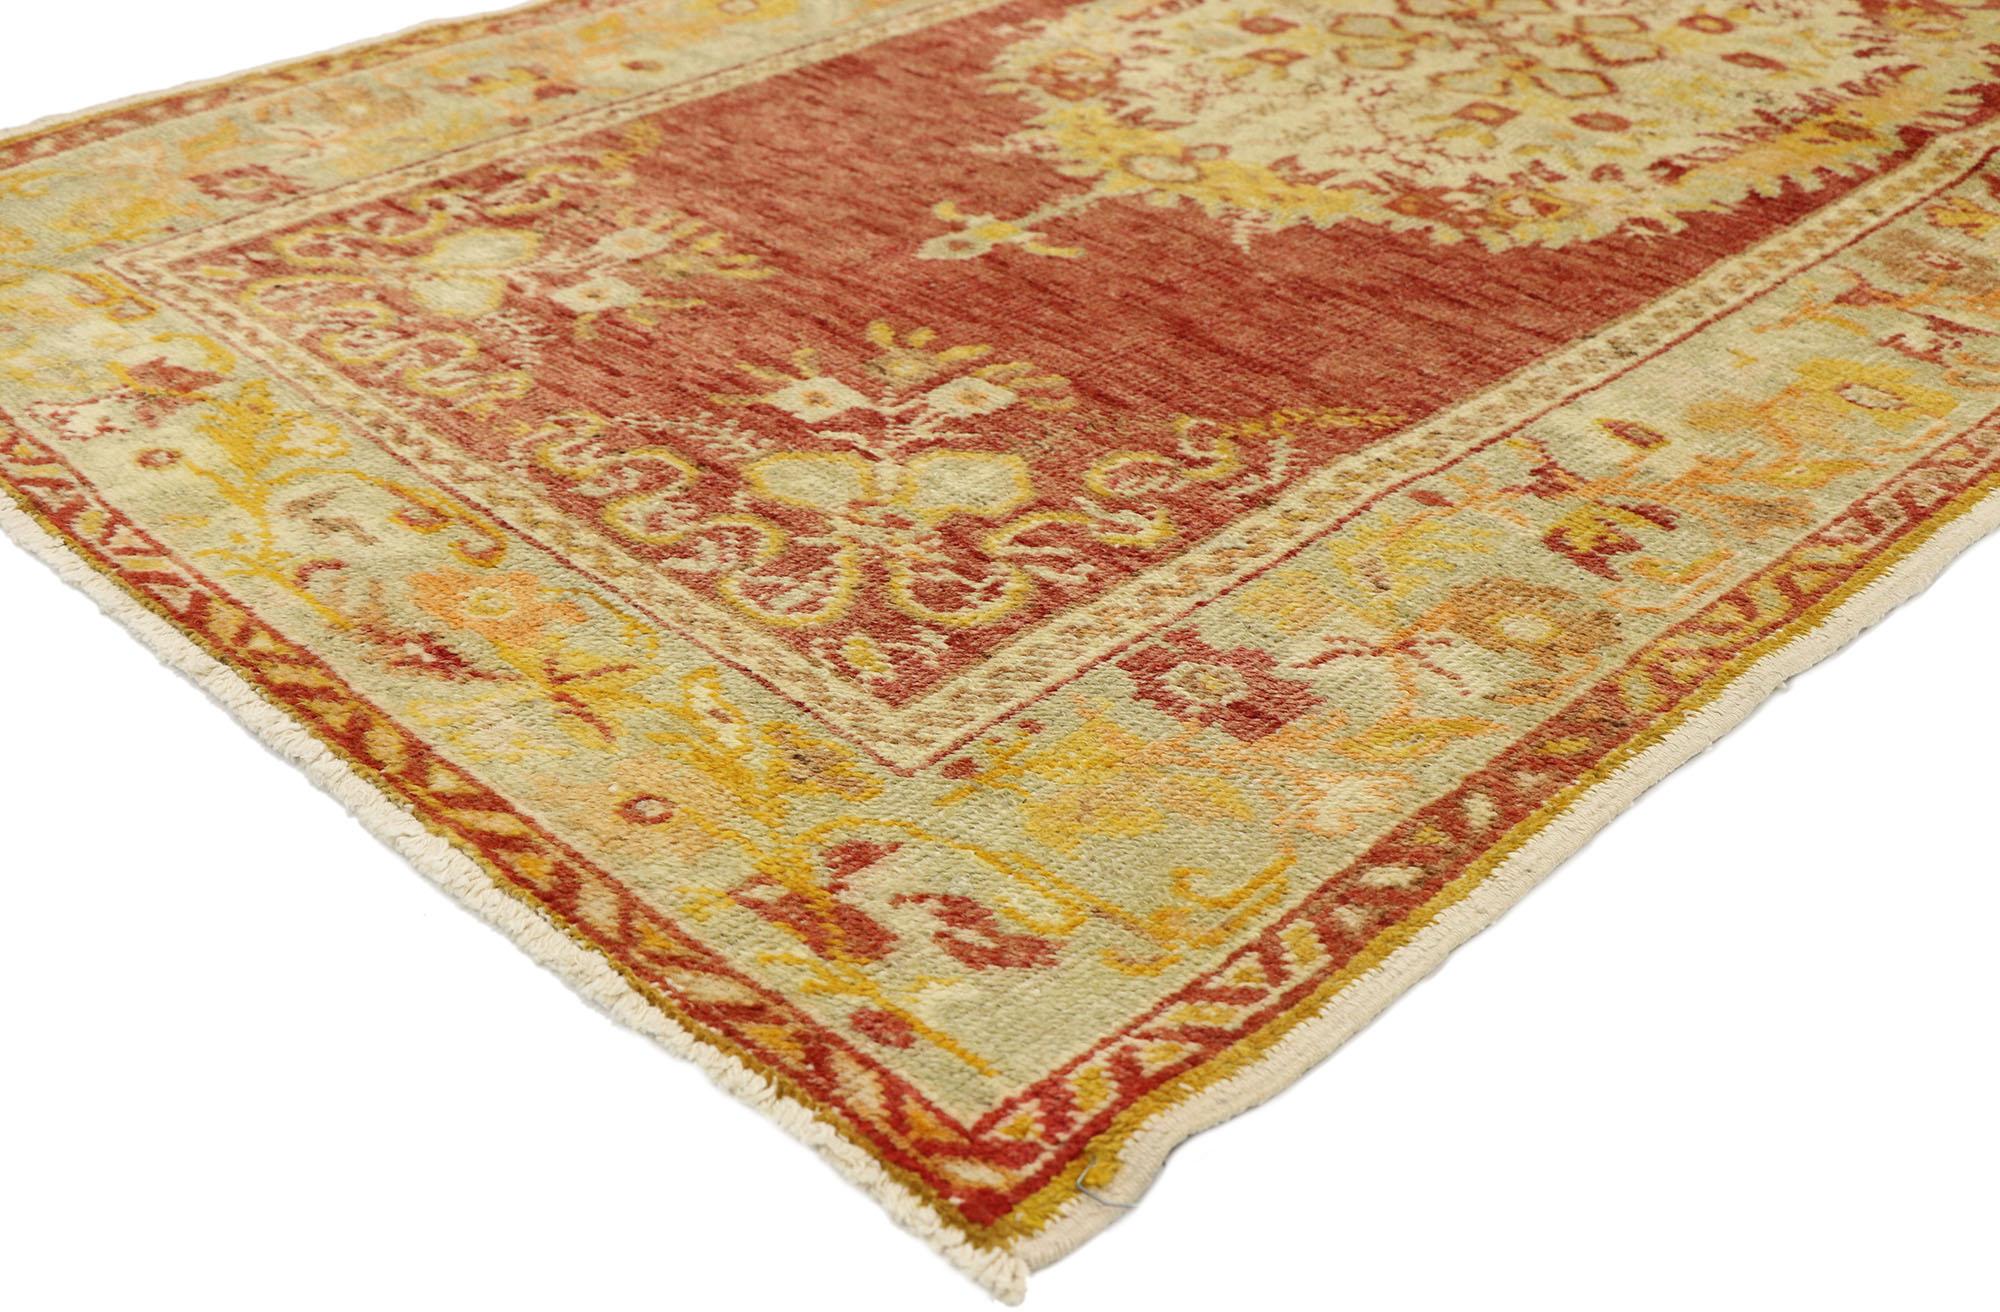 50998 Vintage Turkish Oushak rug with French Rococo style, Kitchen, Foyer or Entry Rug. French Rococo Romanticism meets timeless Anatolian tradition in this Classic style vintage Turkish Oushak rug. Set with an elaborate round-oval medallion against